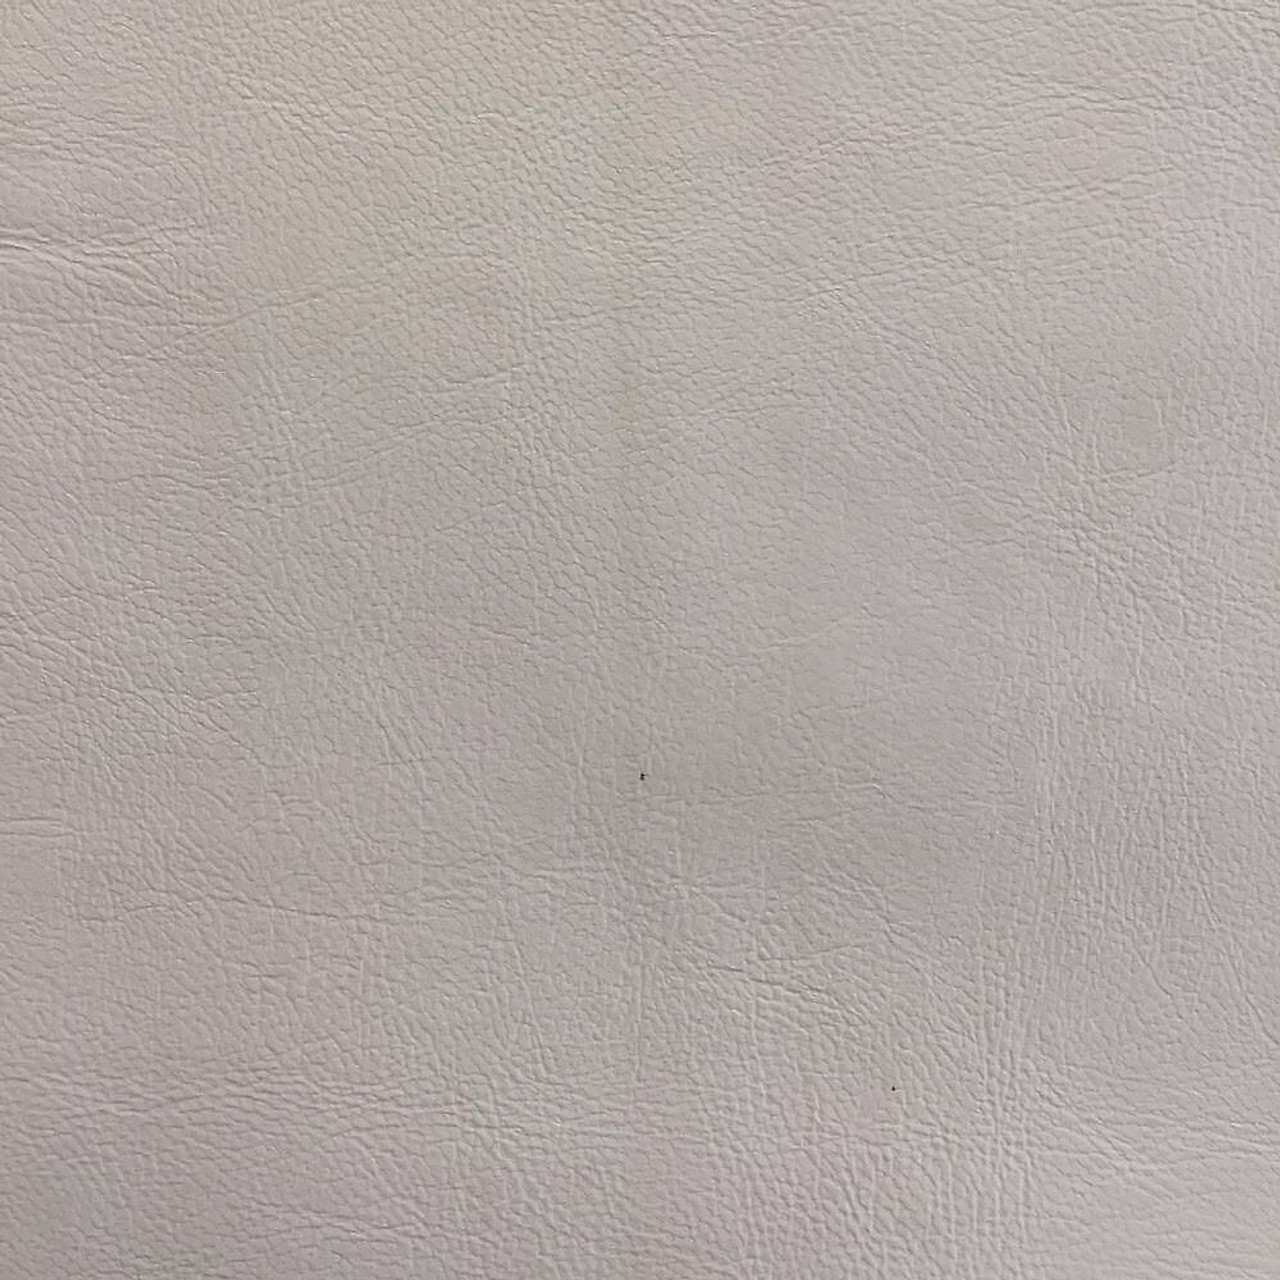 Camel Beige Solid Leather Hide Look Soft Vinyl Upholstery Fabric